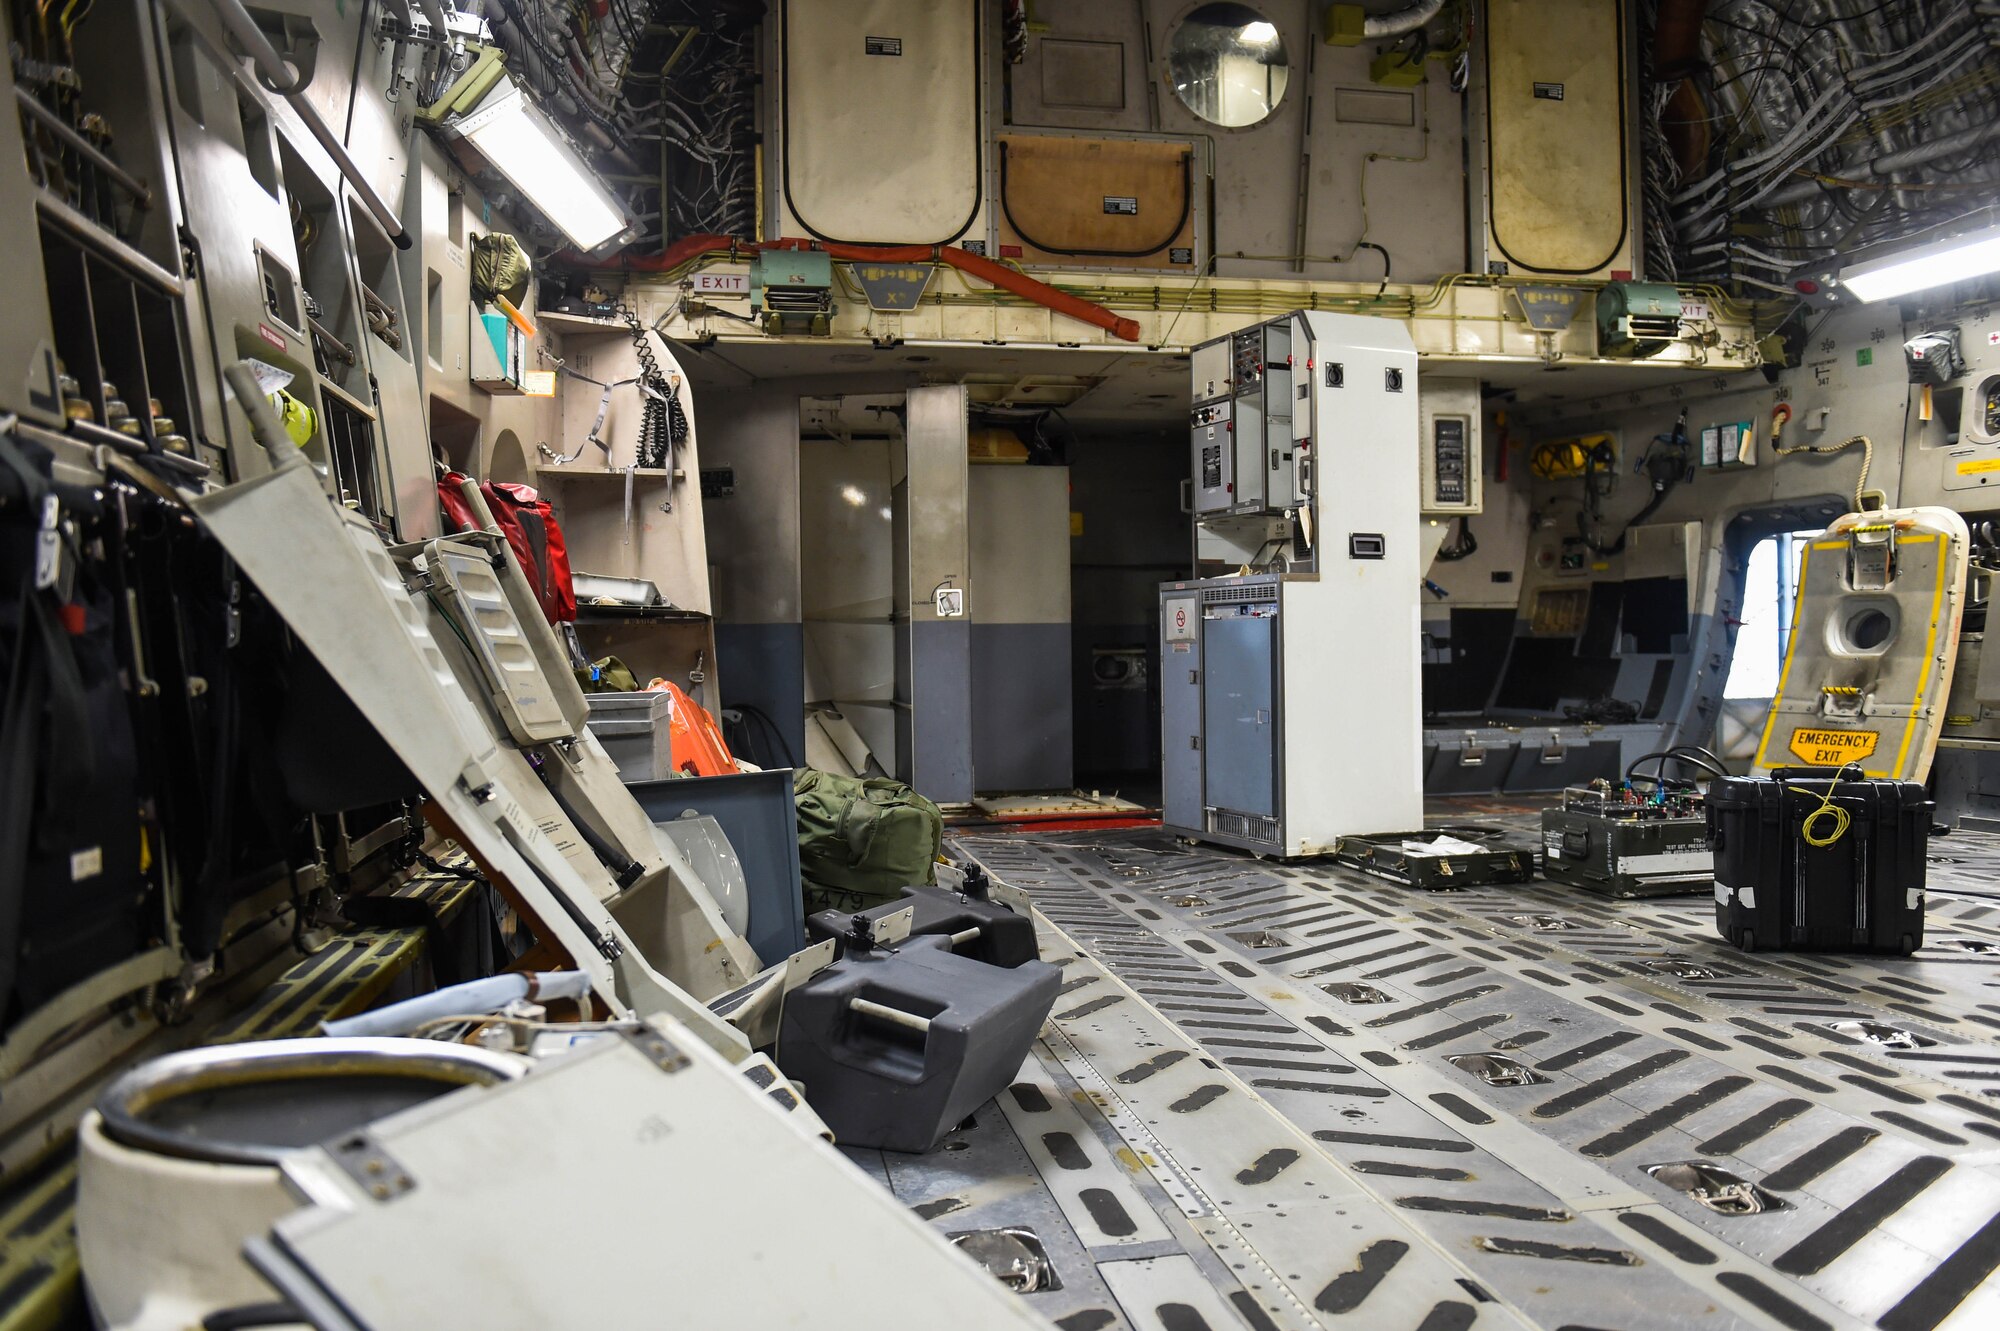 A C-17 Globemaster III undergoes a major interior refurbishment during a home station check on Joint Base Lewis-McChord, Wash., May 20, 2020. Every 180 days a C-17 receives a home station check, during which it undergoes a thorough safety and functionality inspection. (U.S. Air Force photo by Airman 1st Class Mikayla Heineck)